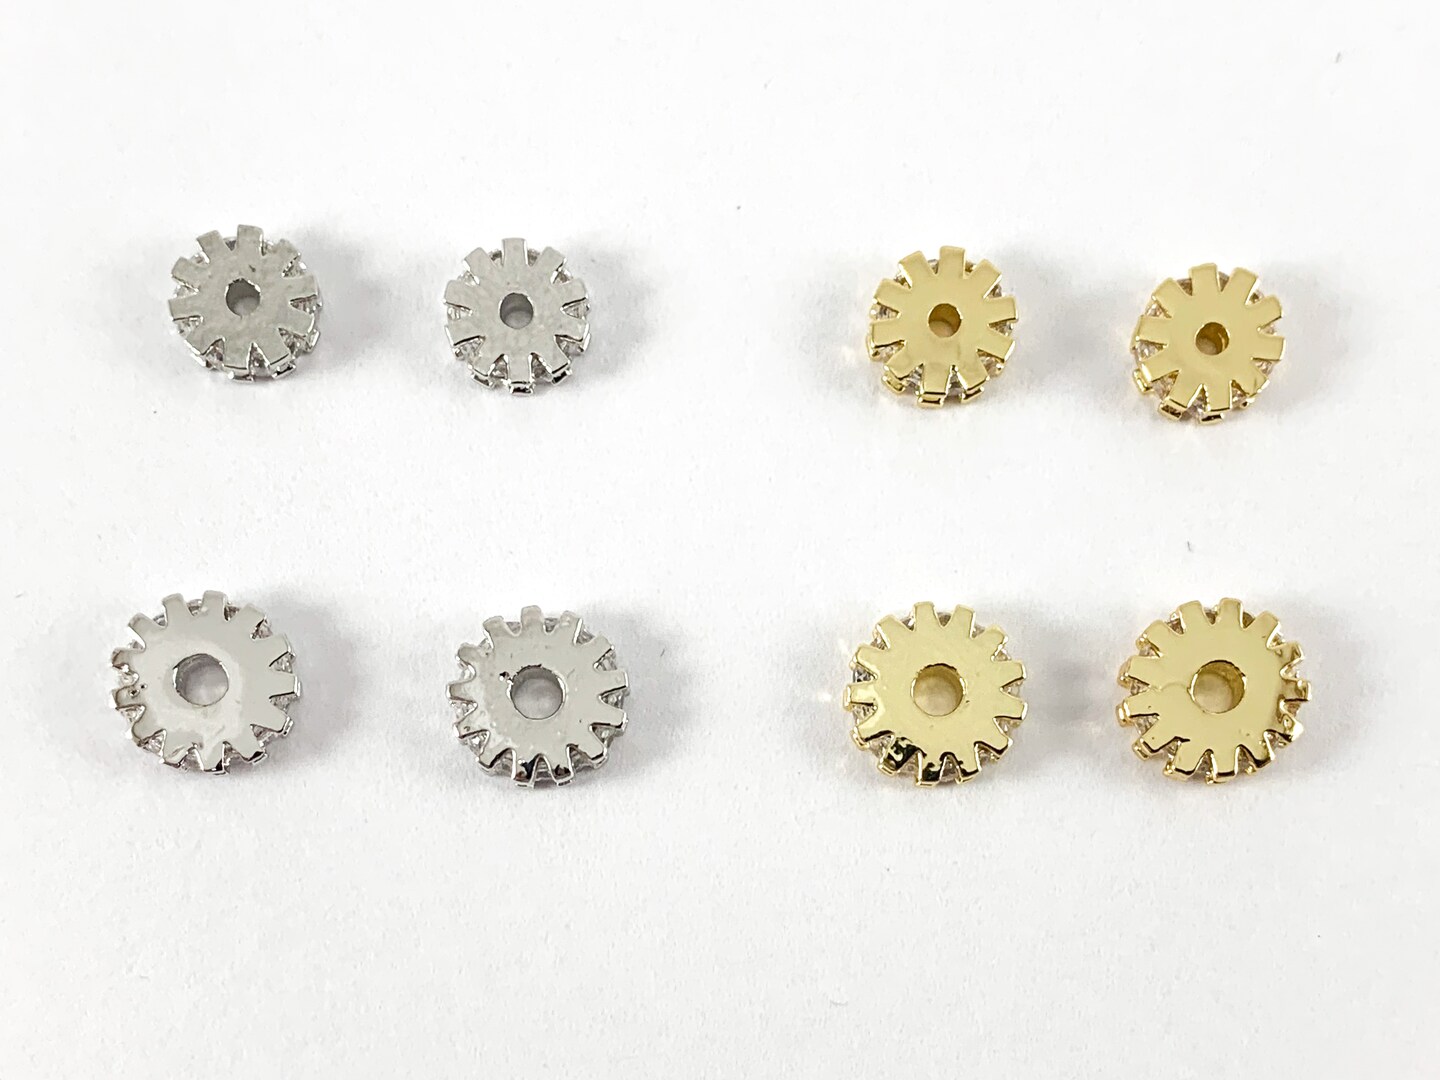 18K Gold/Platinum Plated CZ Pave Rhinestone Spacers Over Brass 6mm 8mm 2pcs